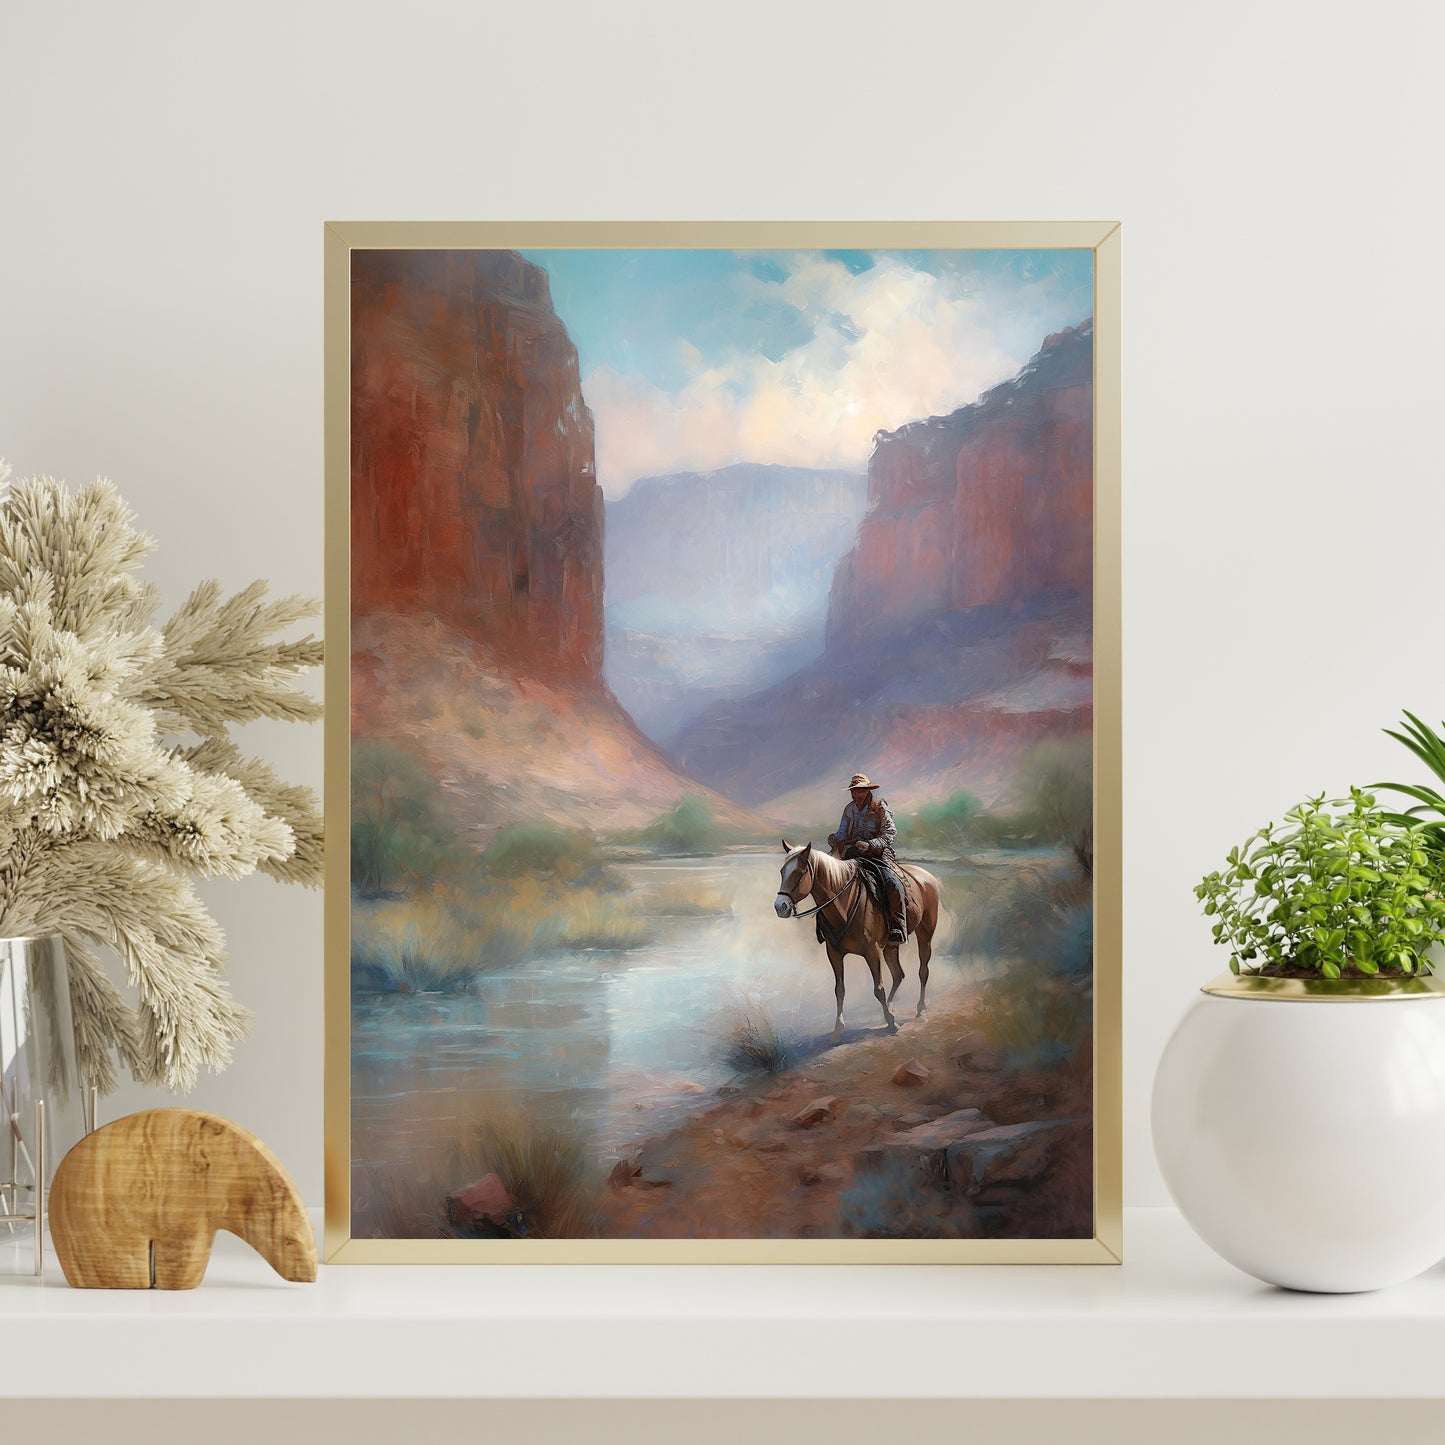 Vintage Wild West Paper Poster Prints Wall Art Lone Rider and Horse Crossing Shallow River between Red Canyons, Soft Pale Colors, Cowboy Painting